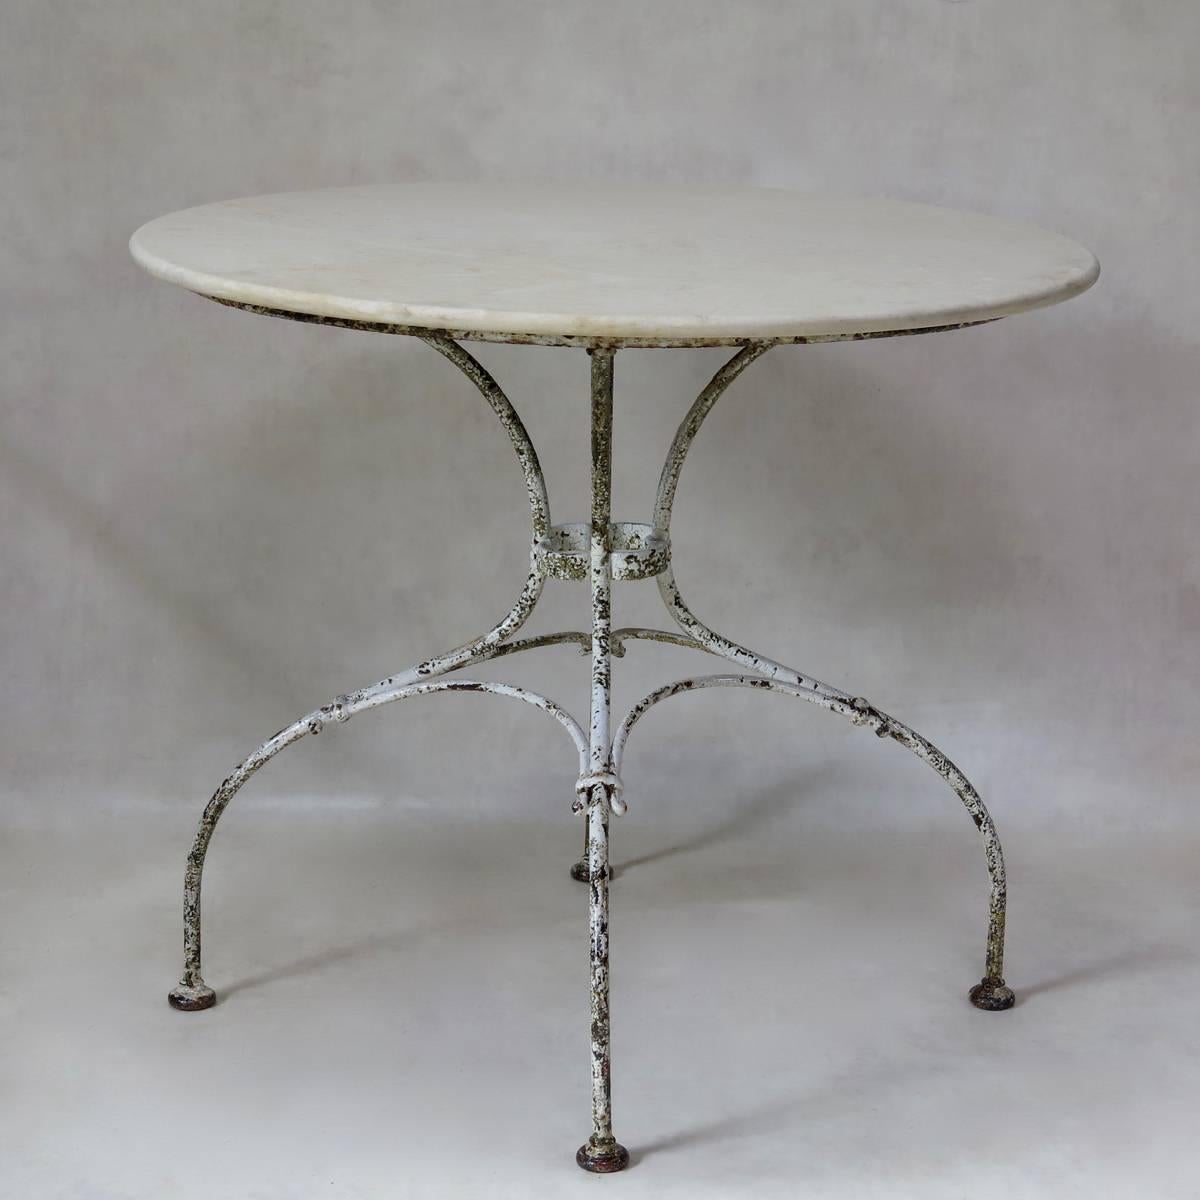 Elegant garden table with a rather unusual and lovely base and a round, off-white marble top. Original paint.